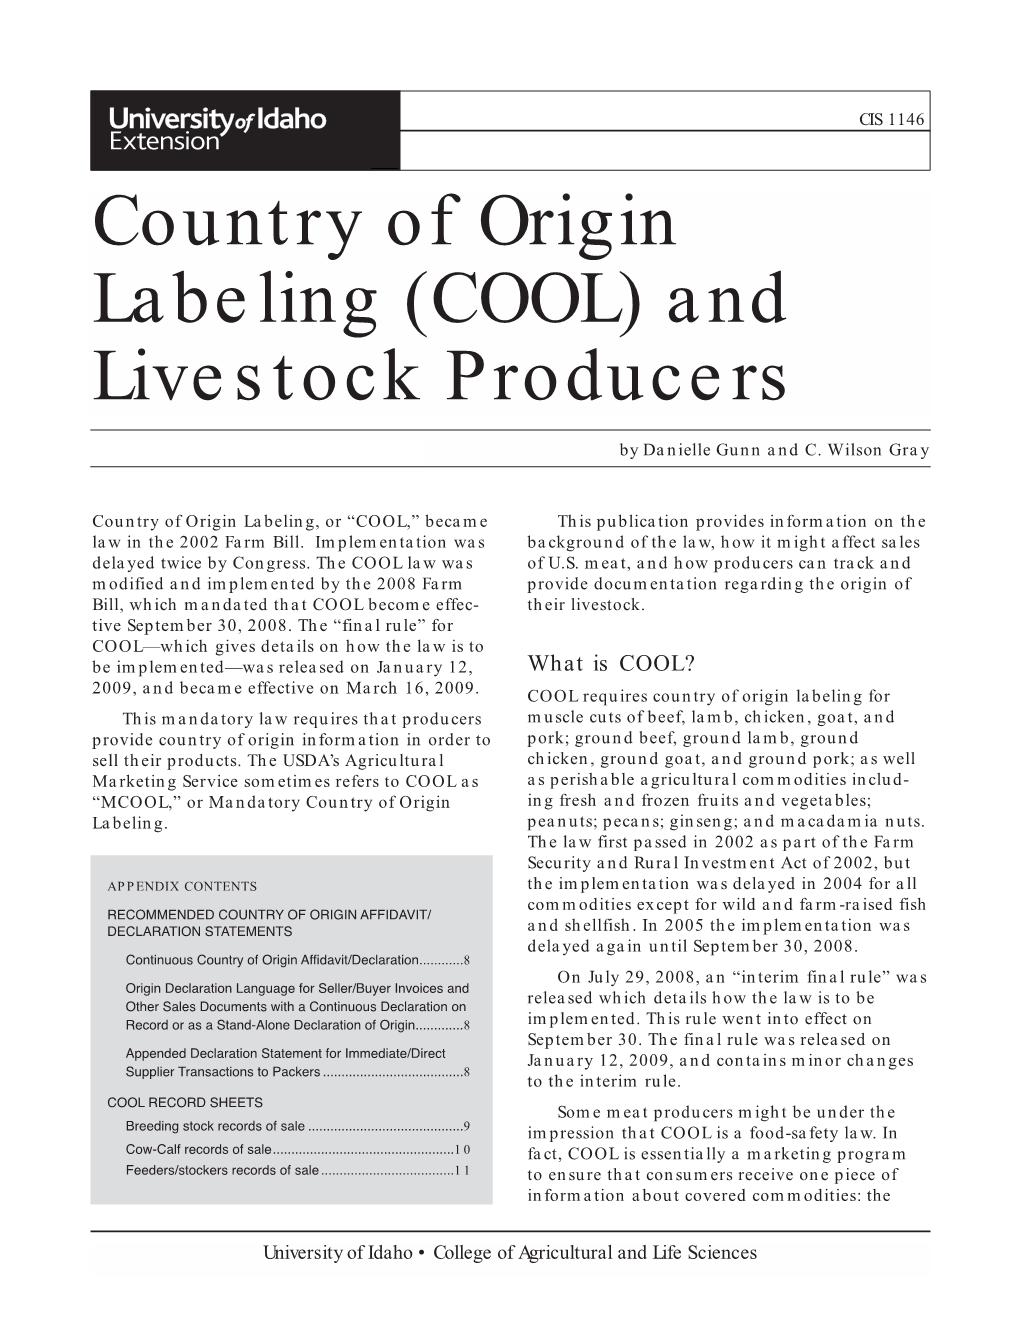 Country of Origin Labeling (COOL) and Livestock Producers